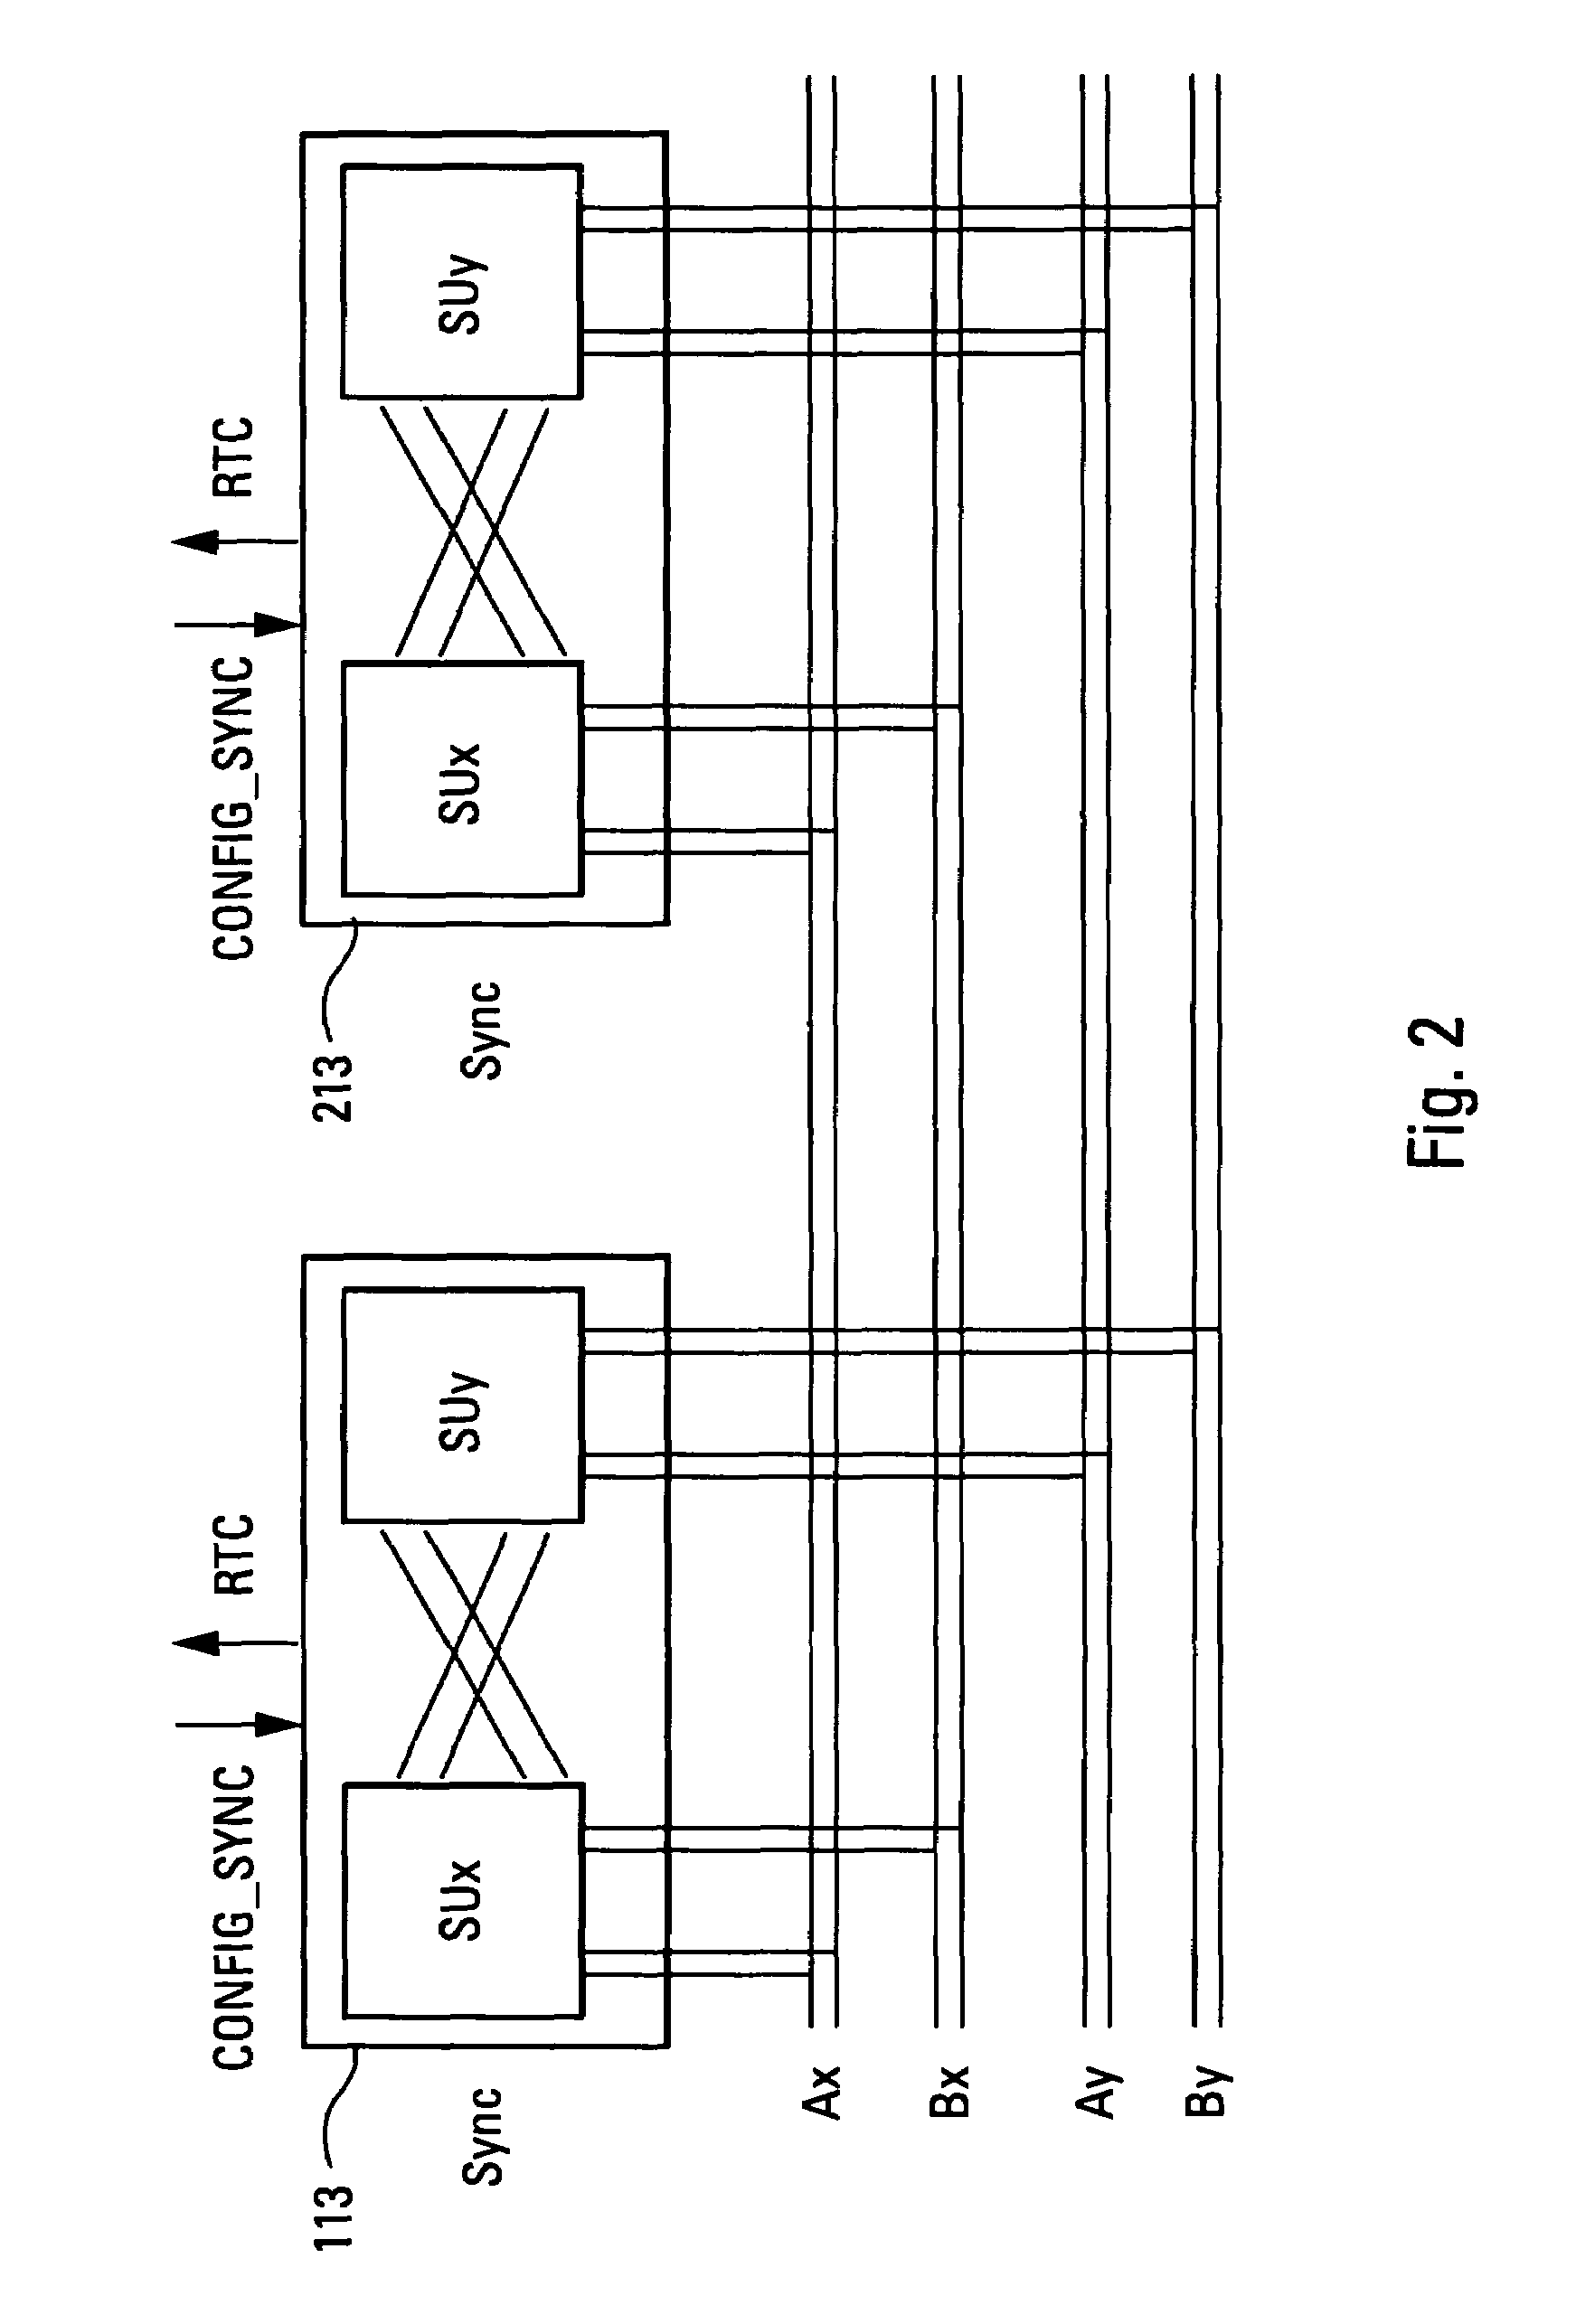 Fault-tolerant synchronisation device for a real-time computer network